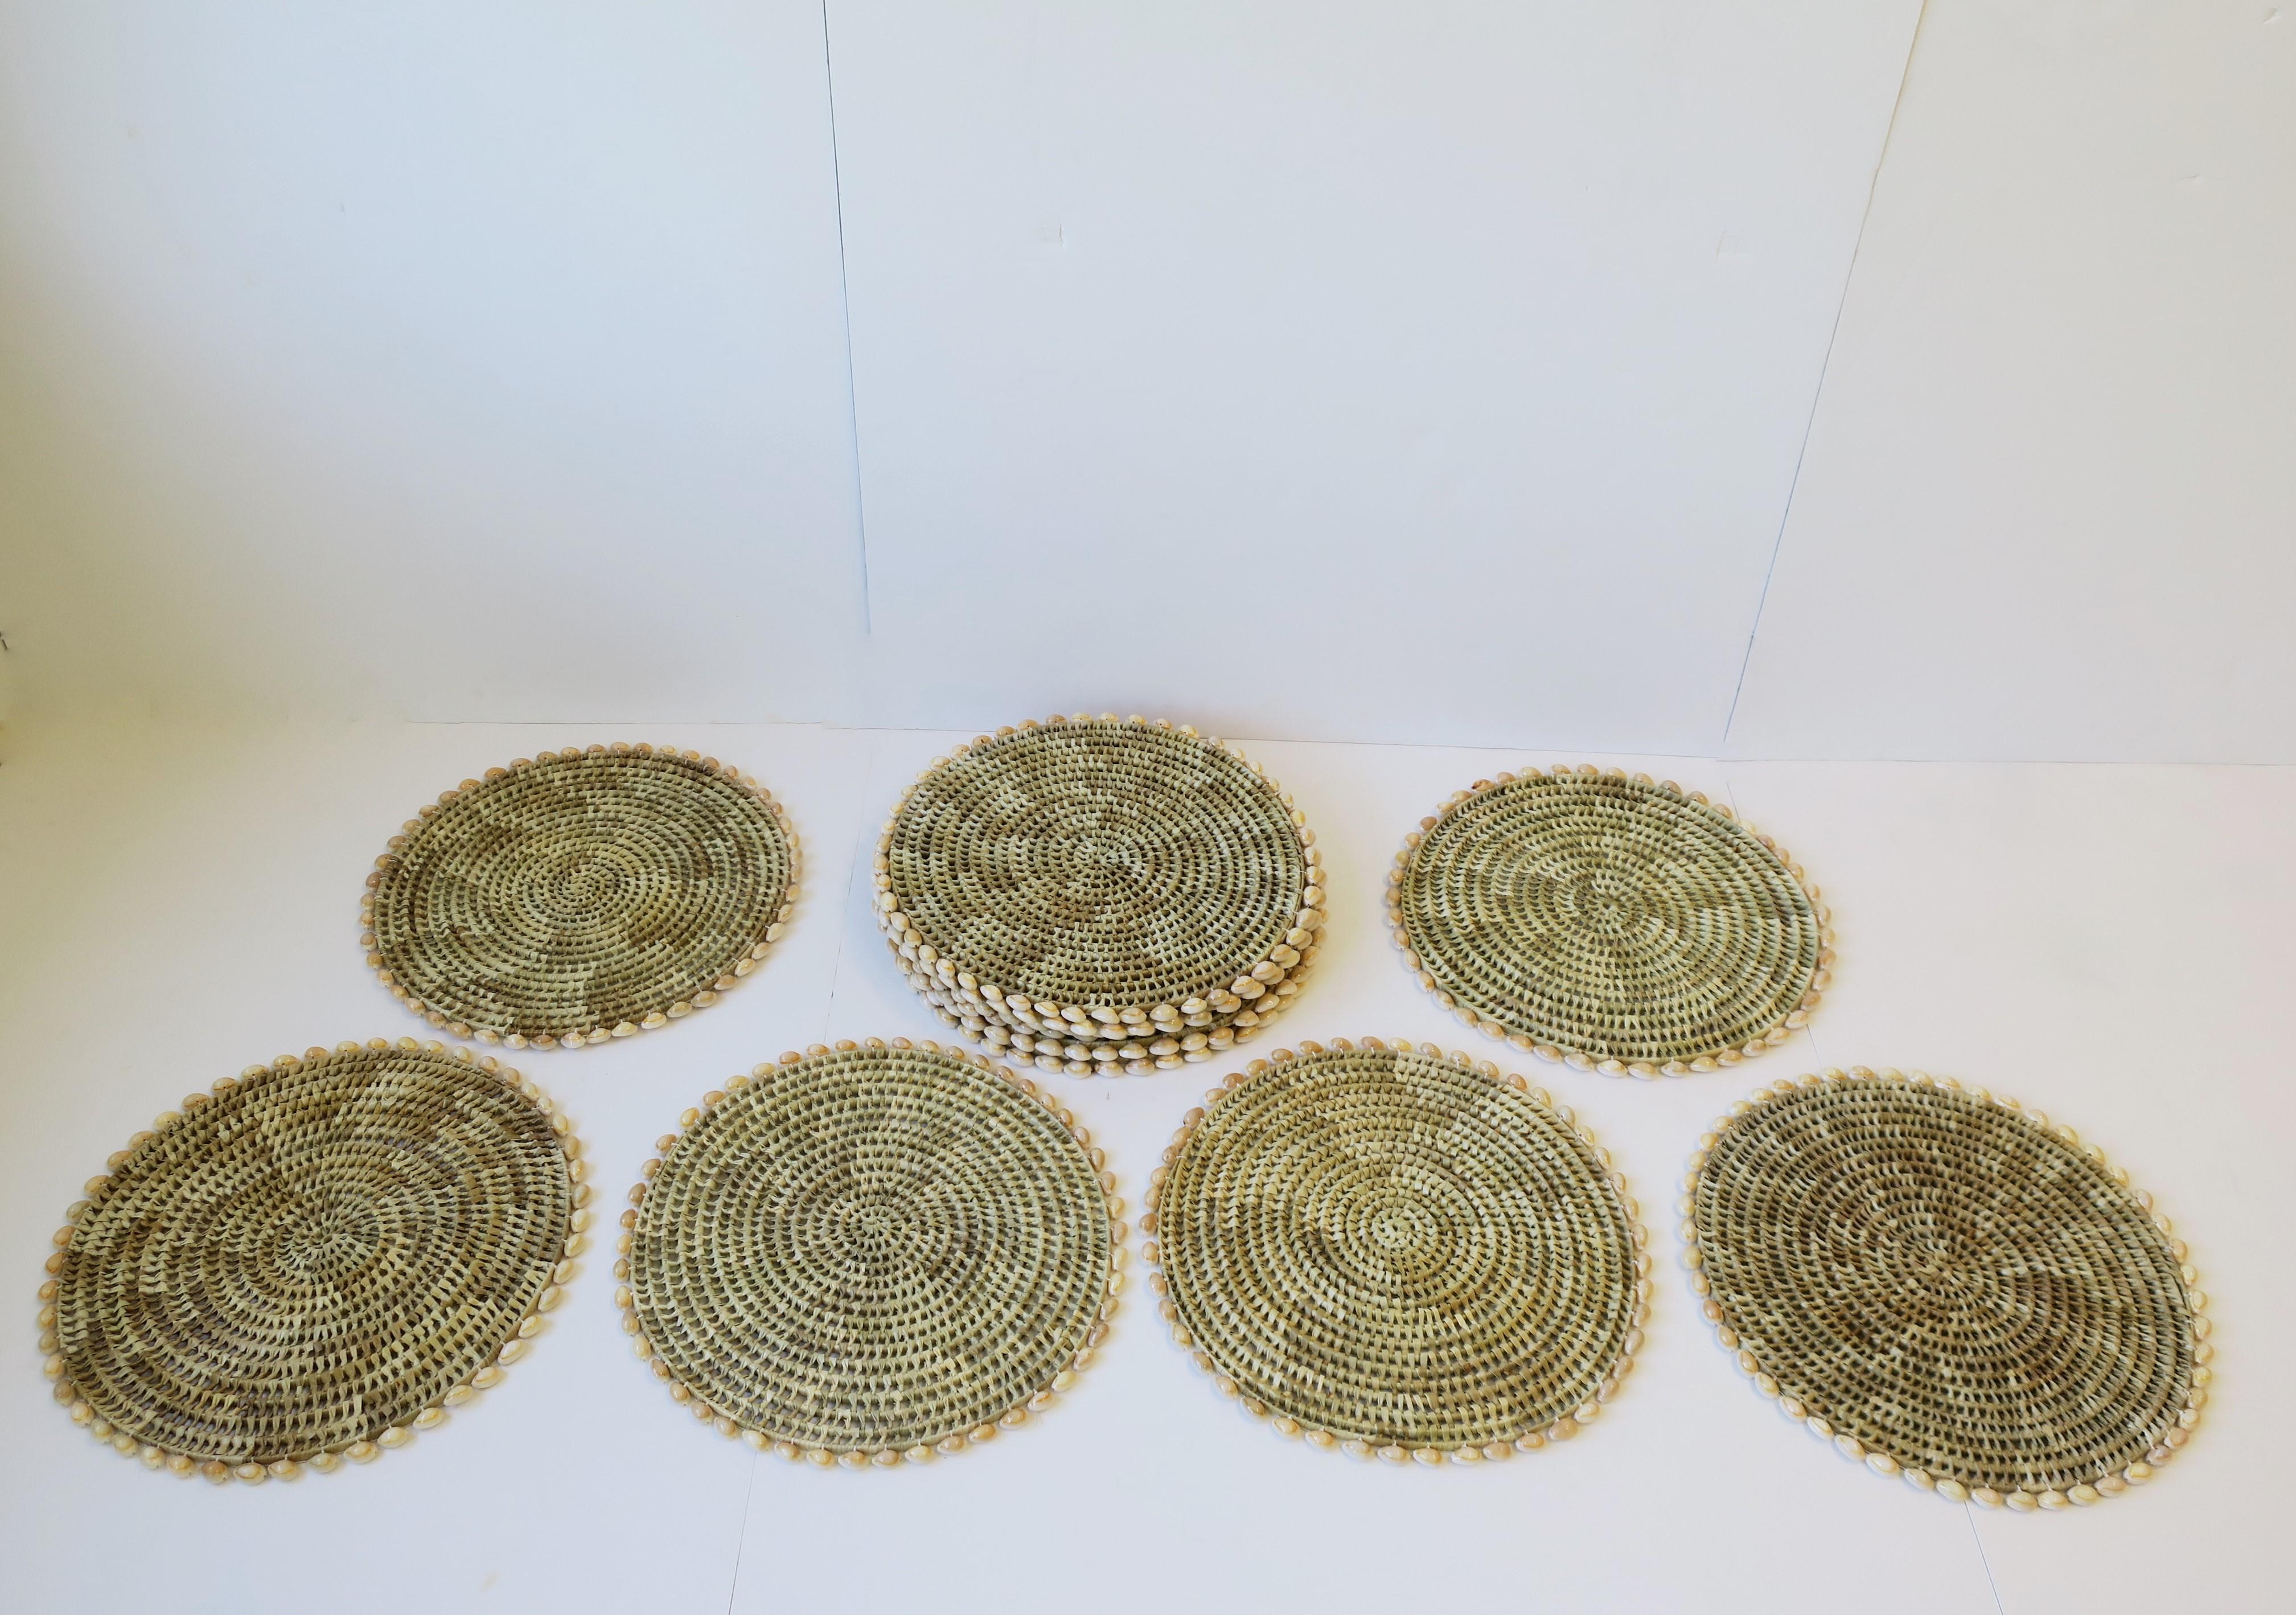 Seashell and Wicker Placemats or Dinner Plate Chargers, Set of 12 5